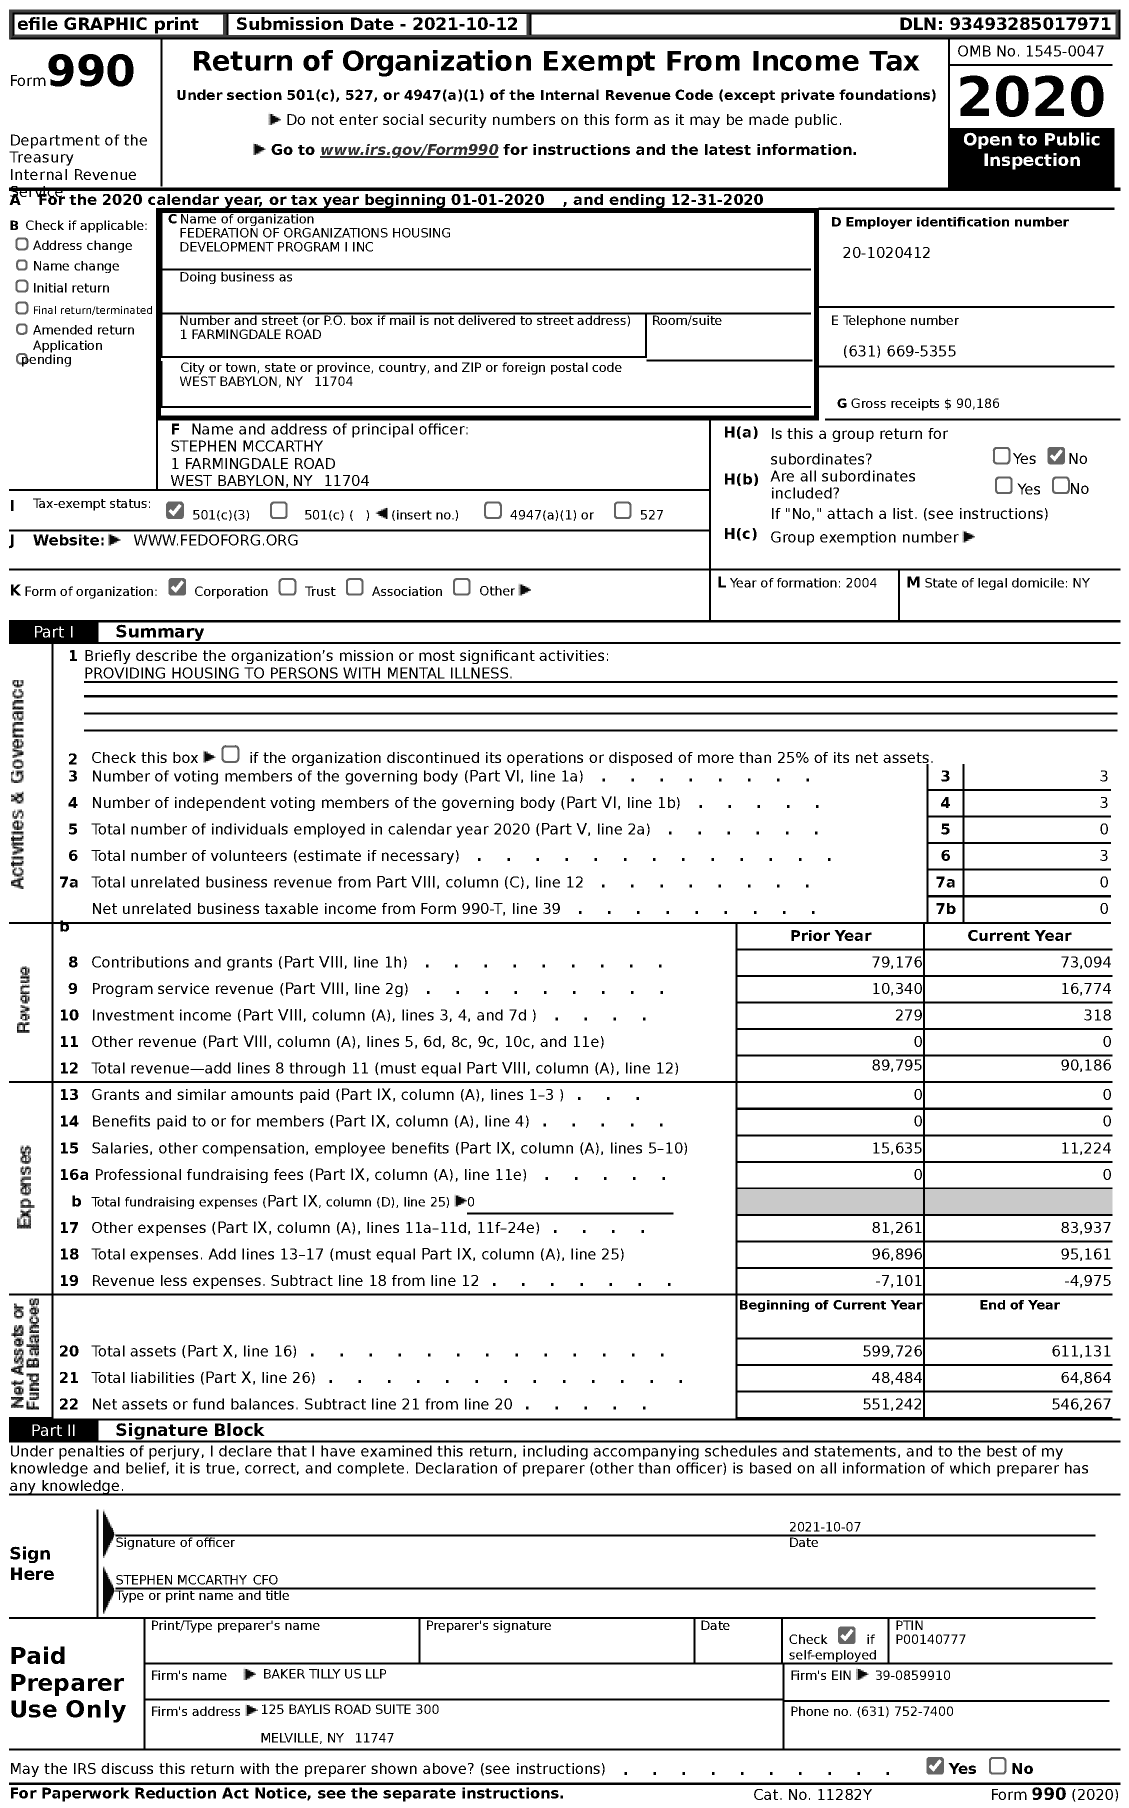 Image of first page of 2020 Form 990 for Federation of Organizations Housing Development Program I